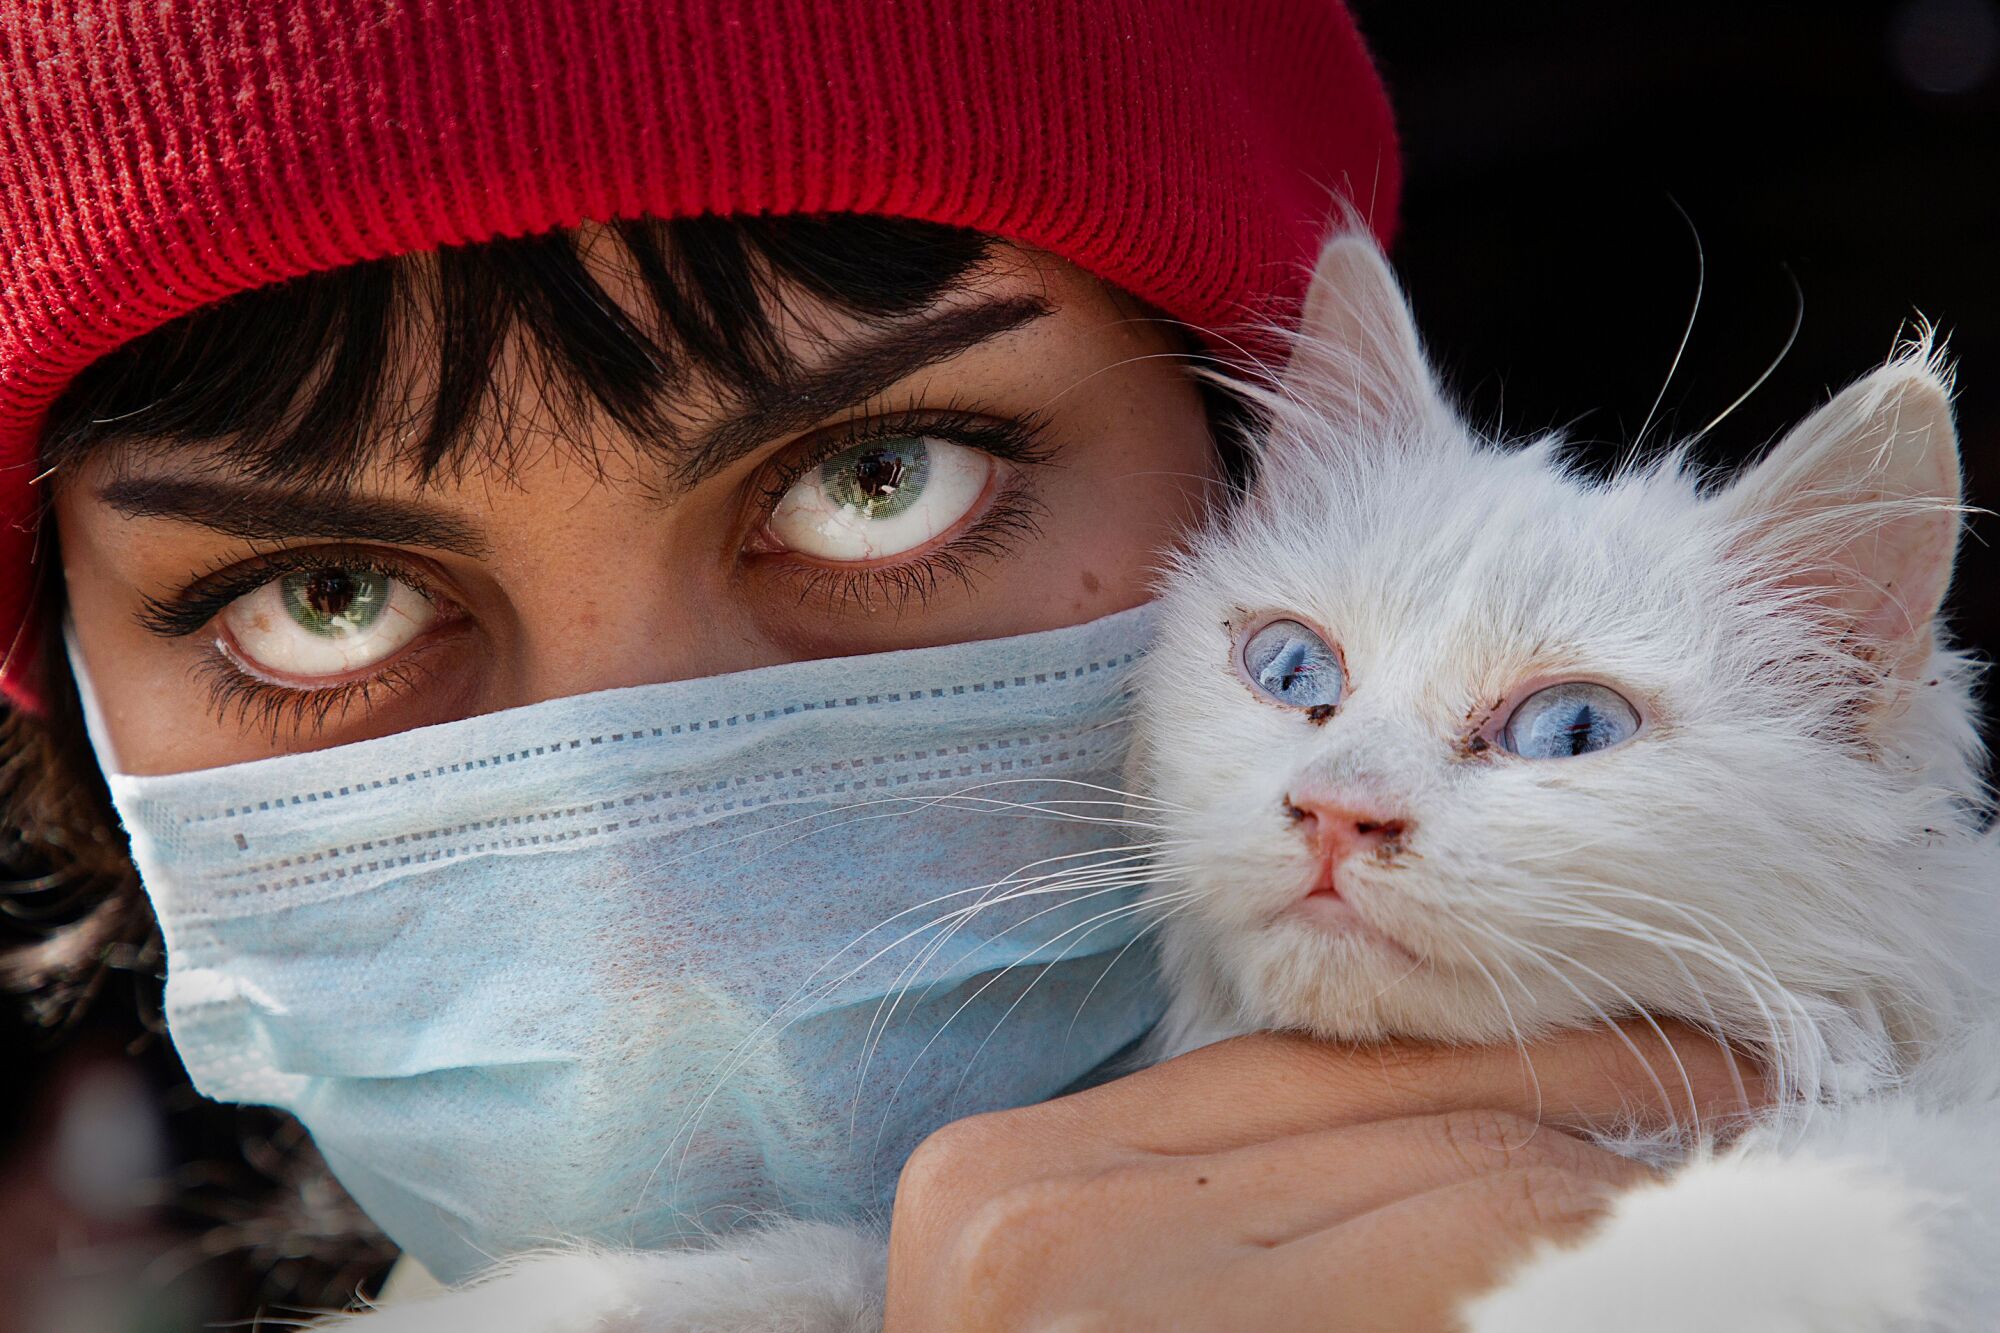 IRAQ: A woman wearing a protective mask and colored contact lenses holds her cat as she poses for a picture during a protest against corruption in the Iraqi government in the southern city of Basra on Feb. 27.